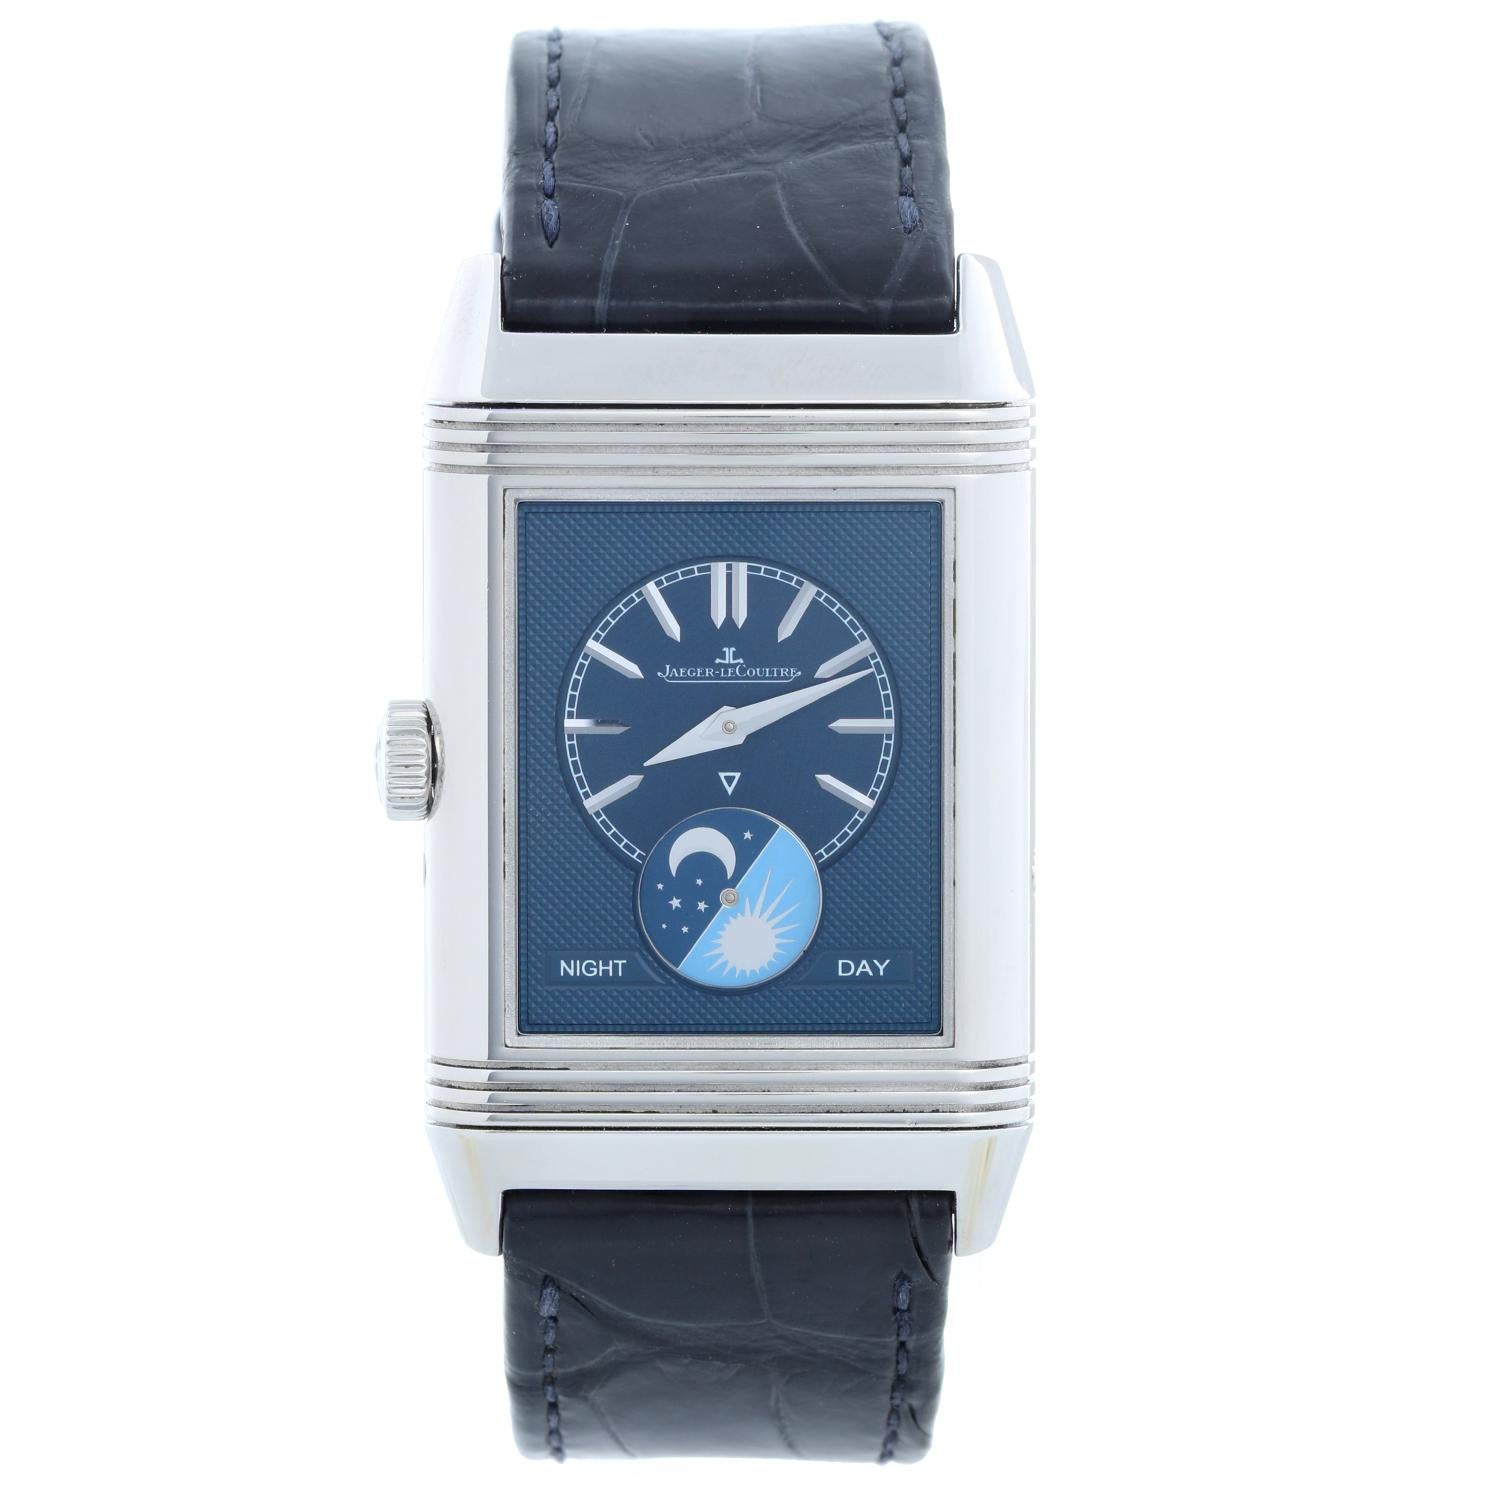 Jaeger LeCoultre Reverso Tribute Moon Duo Q3958420 Stainless Steel watch - Manual winding. Stainless steel case ( 29mm x 49mm ). Silver dial with stick hour markers  and subdial at 6 o'clock; Blue dial with stick hour marker and moon subdial at 6